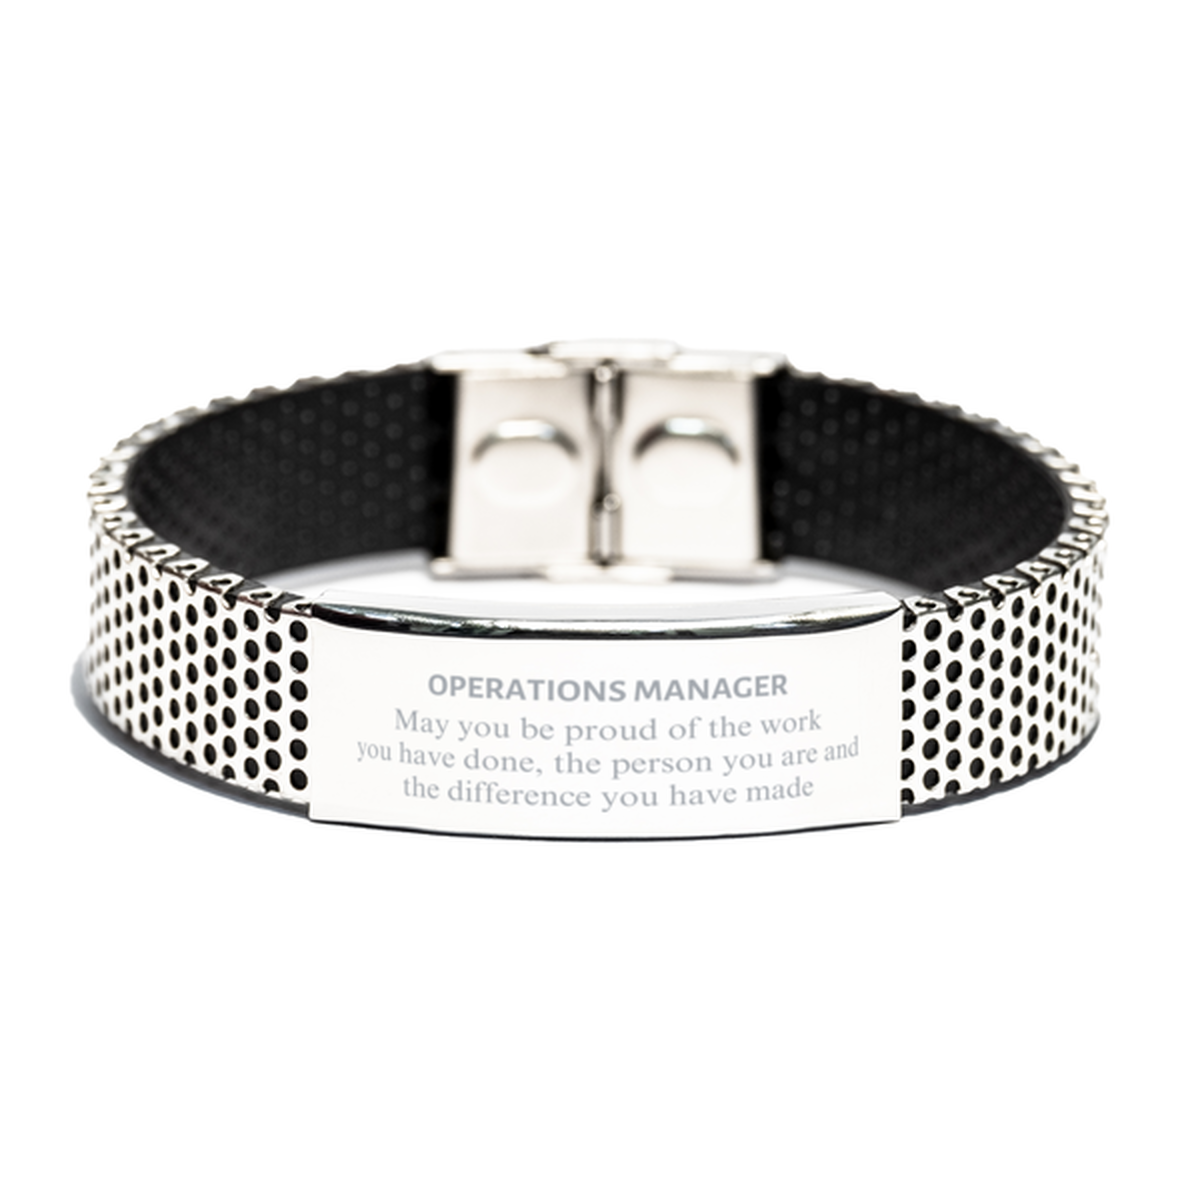 Operations Manager May you be proud of the work you have done, Retirement Operations Manager Stainless Steel Bracelet for Colleague Appreciation Gifts Amazing for Operations Manager